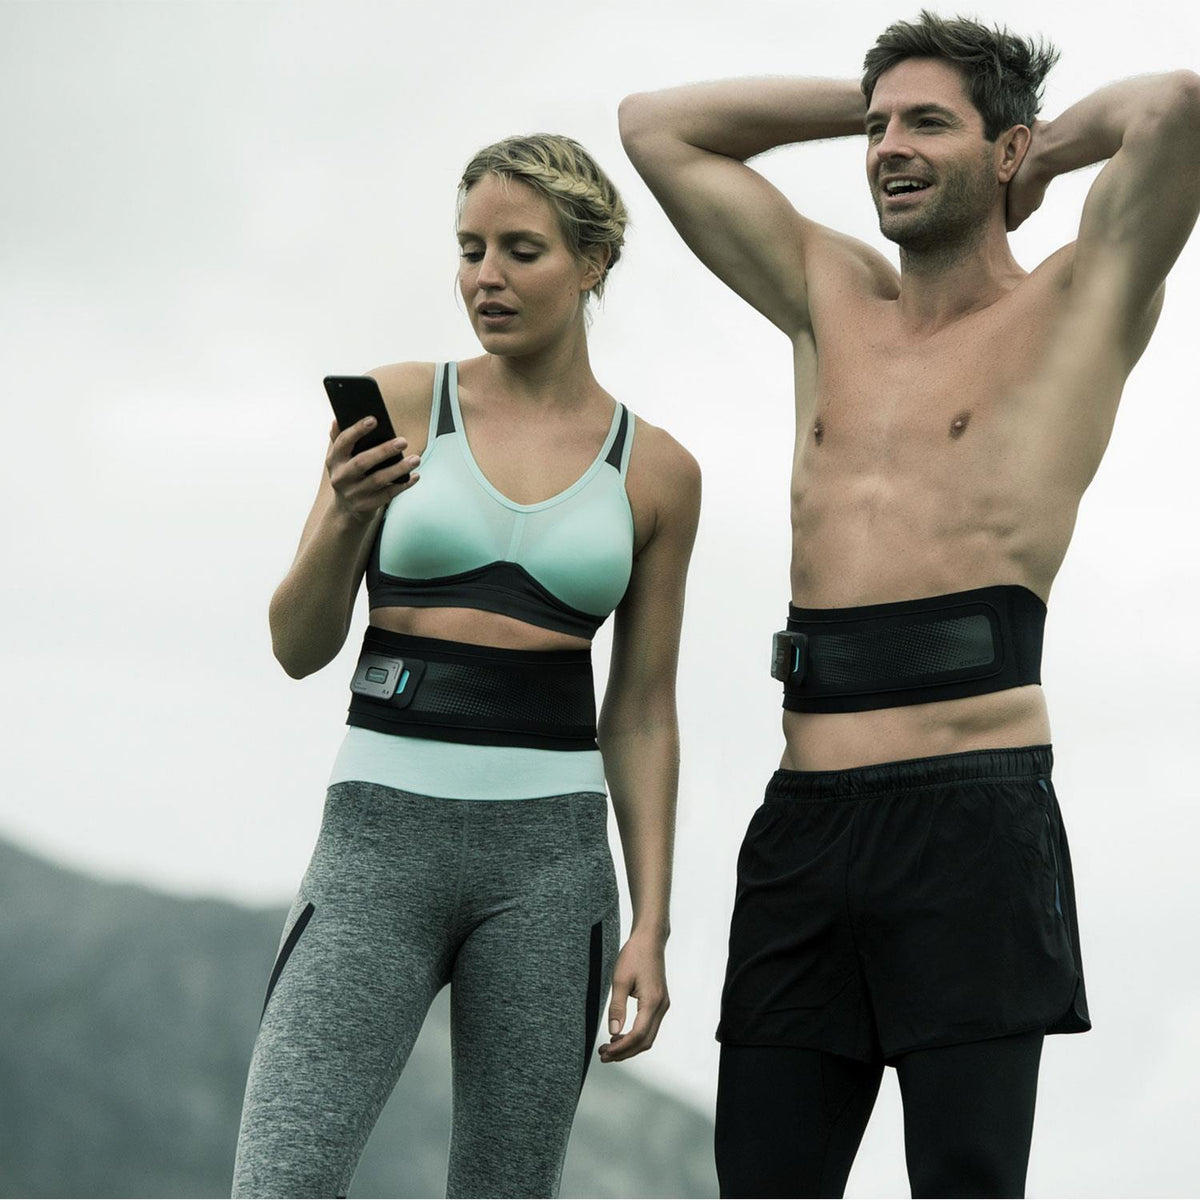 Slendertone Connect Abs Connected Abdominal Toning Belt 61-107 cm